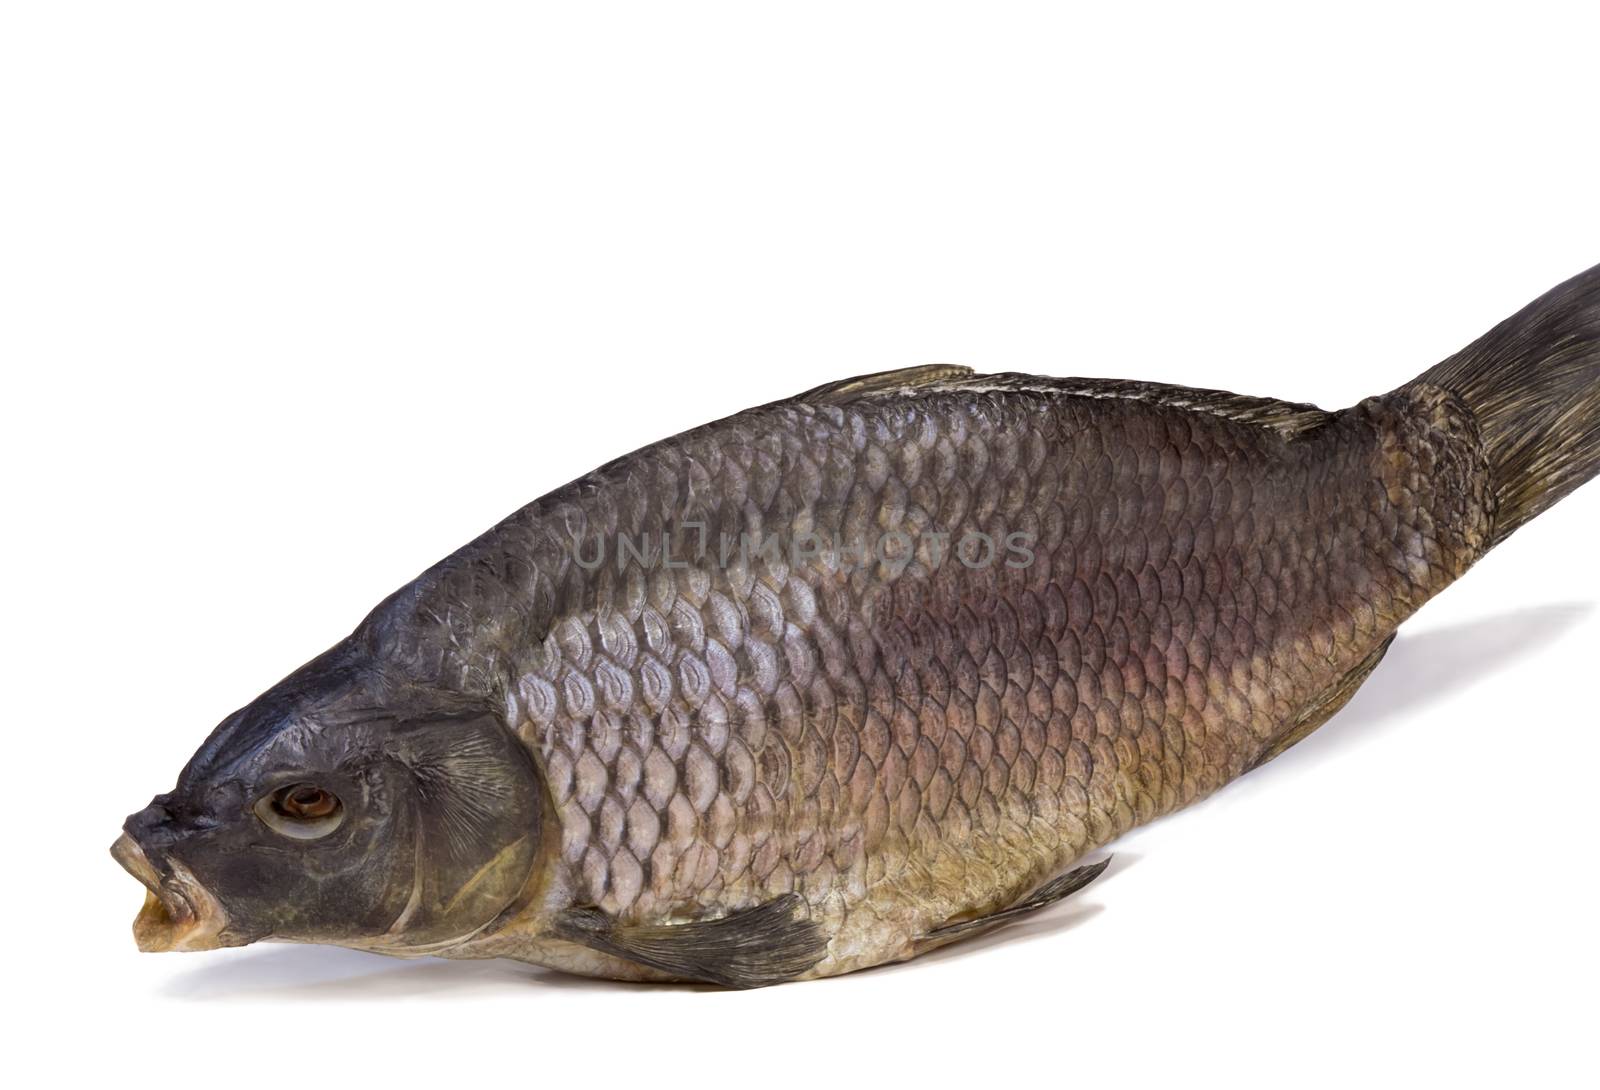 River fish such as carp, salt and dried . Presented on a white background